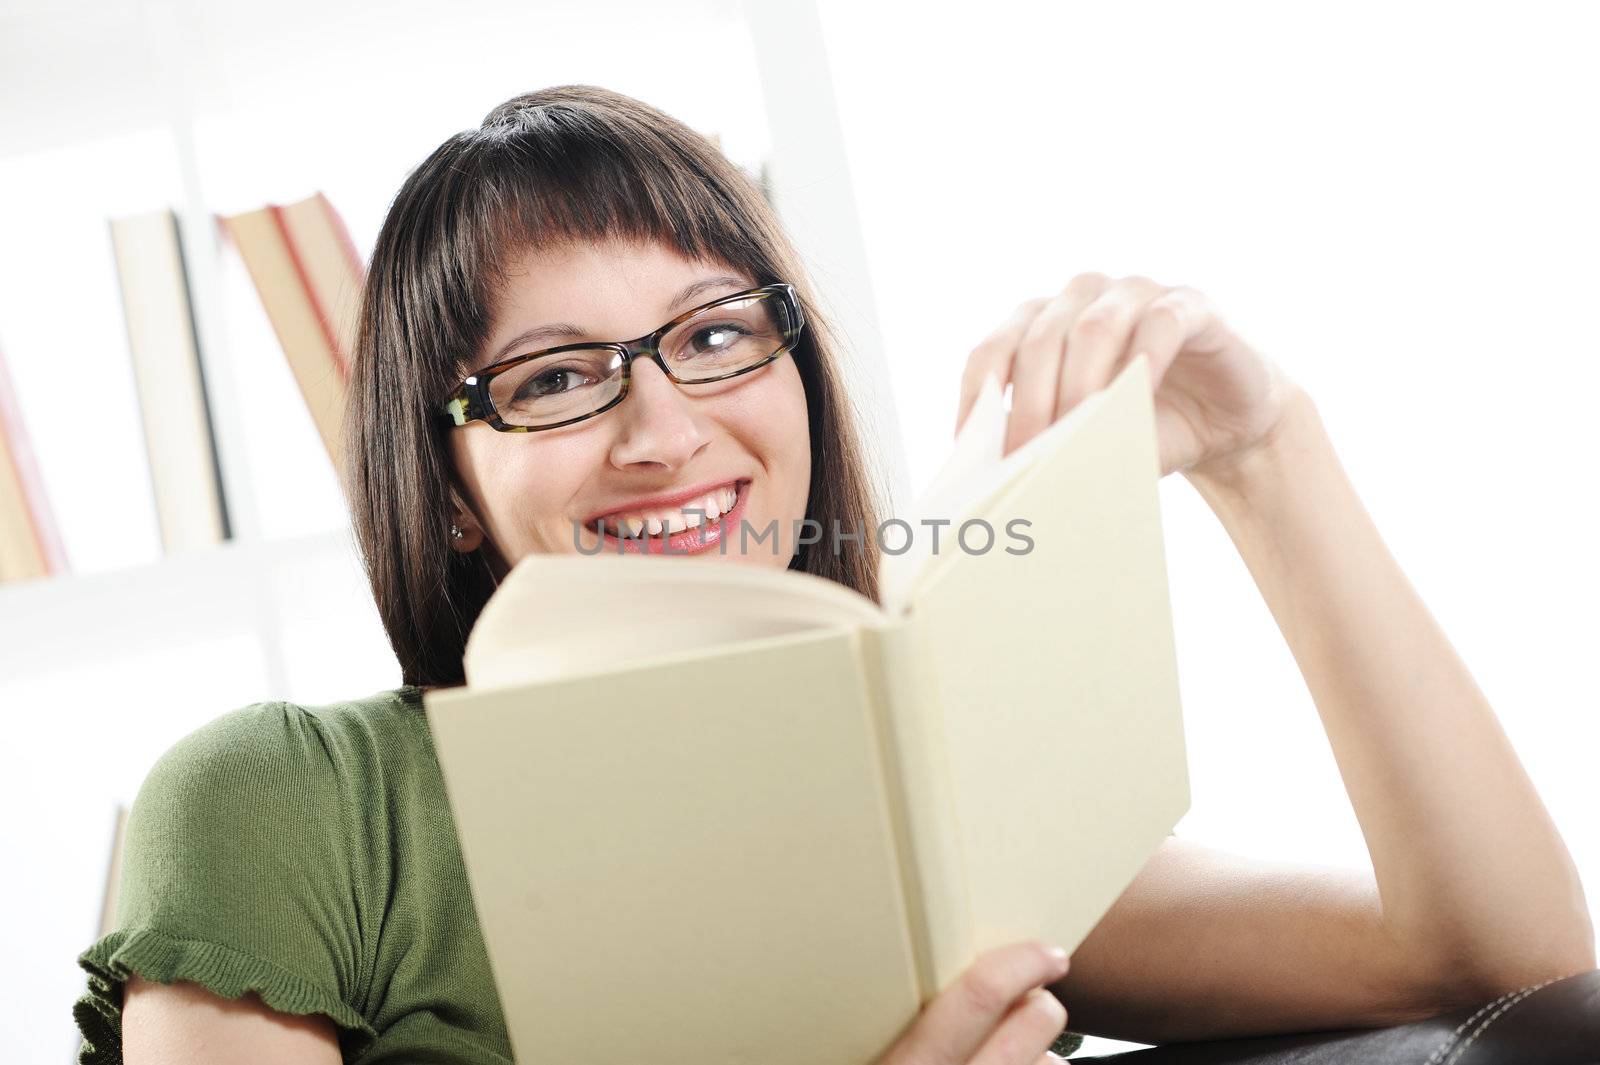  young woman woman with book , bookshelf on background